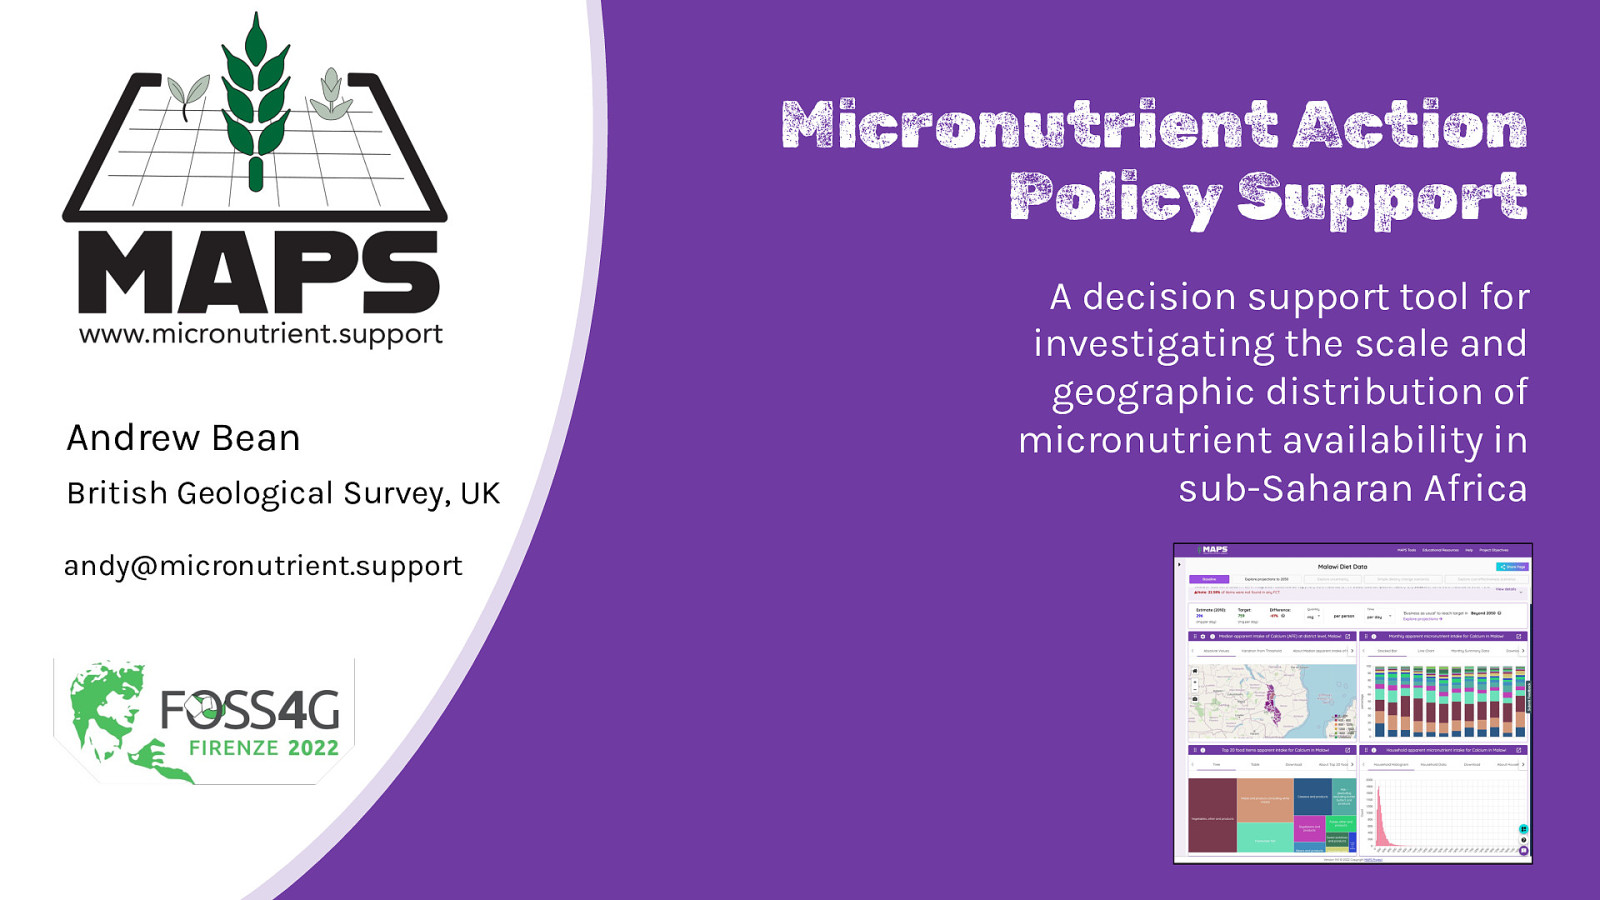 Micronutrient Action Policy Support - A decision support tool for investigating the scale and geographic distribution of micronutrient availability in sub-Saharan Africa